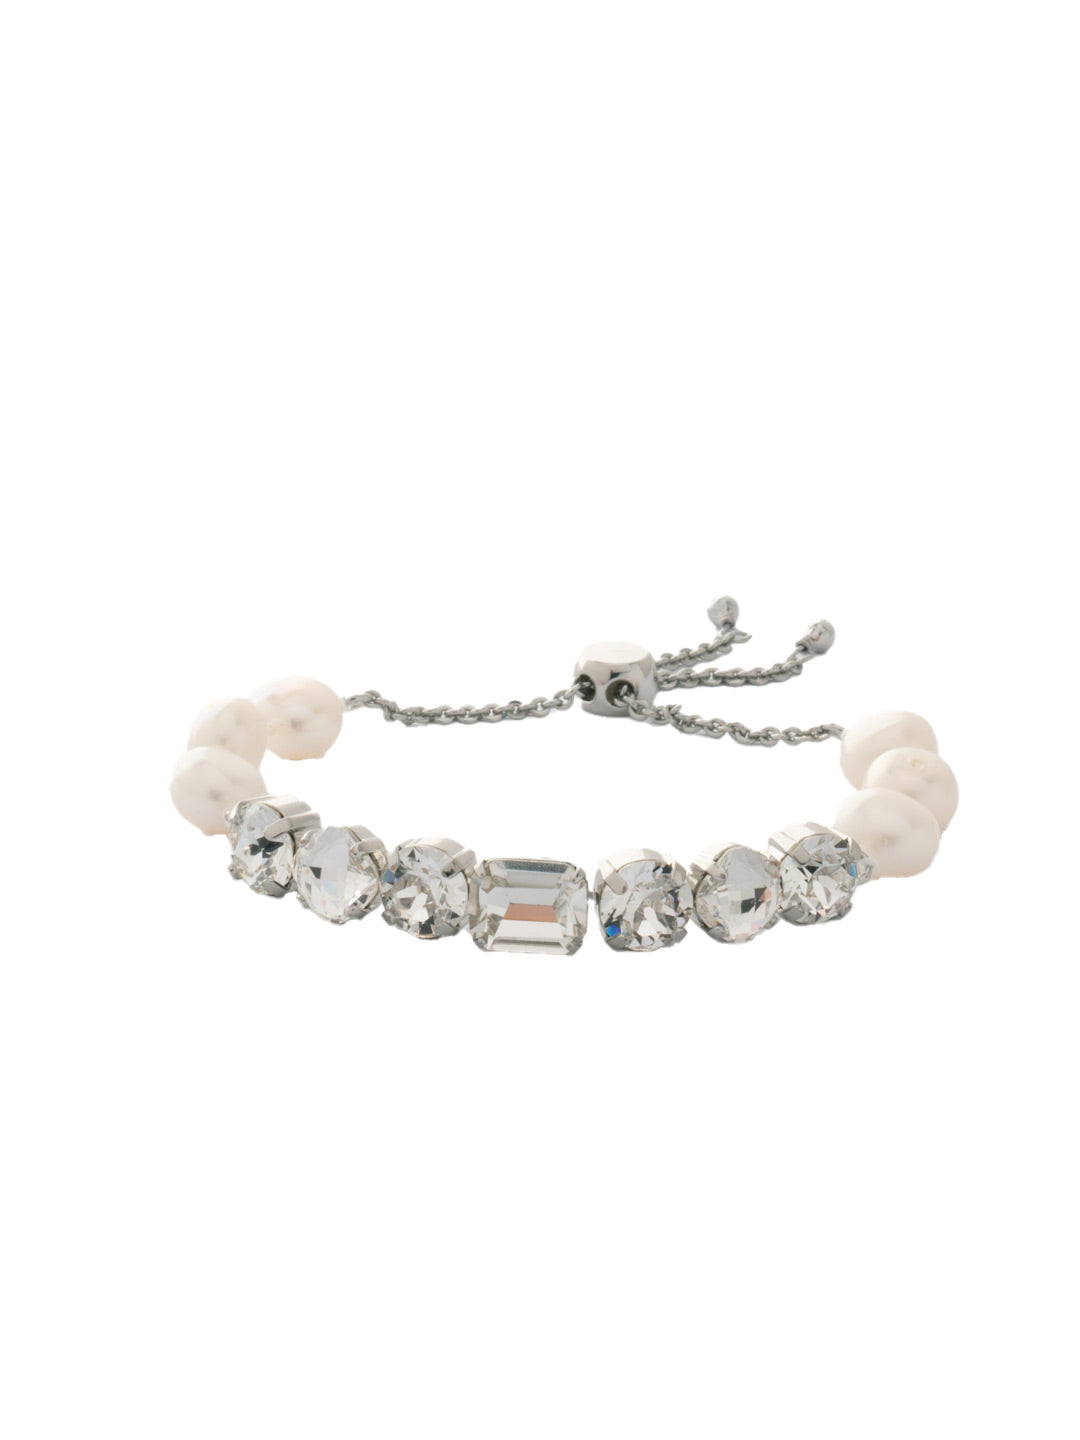 Cadenza Slider Bracelet - BEC14RHCRY - <p>A classic line bracelet reimagined with a adjustable slider clasp. A pattern of crystals and pearls give this bracelet all around allure. From Sorrelli's Crystal collection in our Palladium Silver-tone finish.</p>